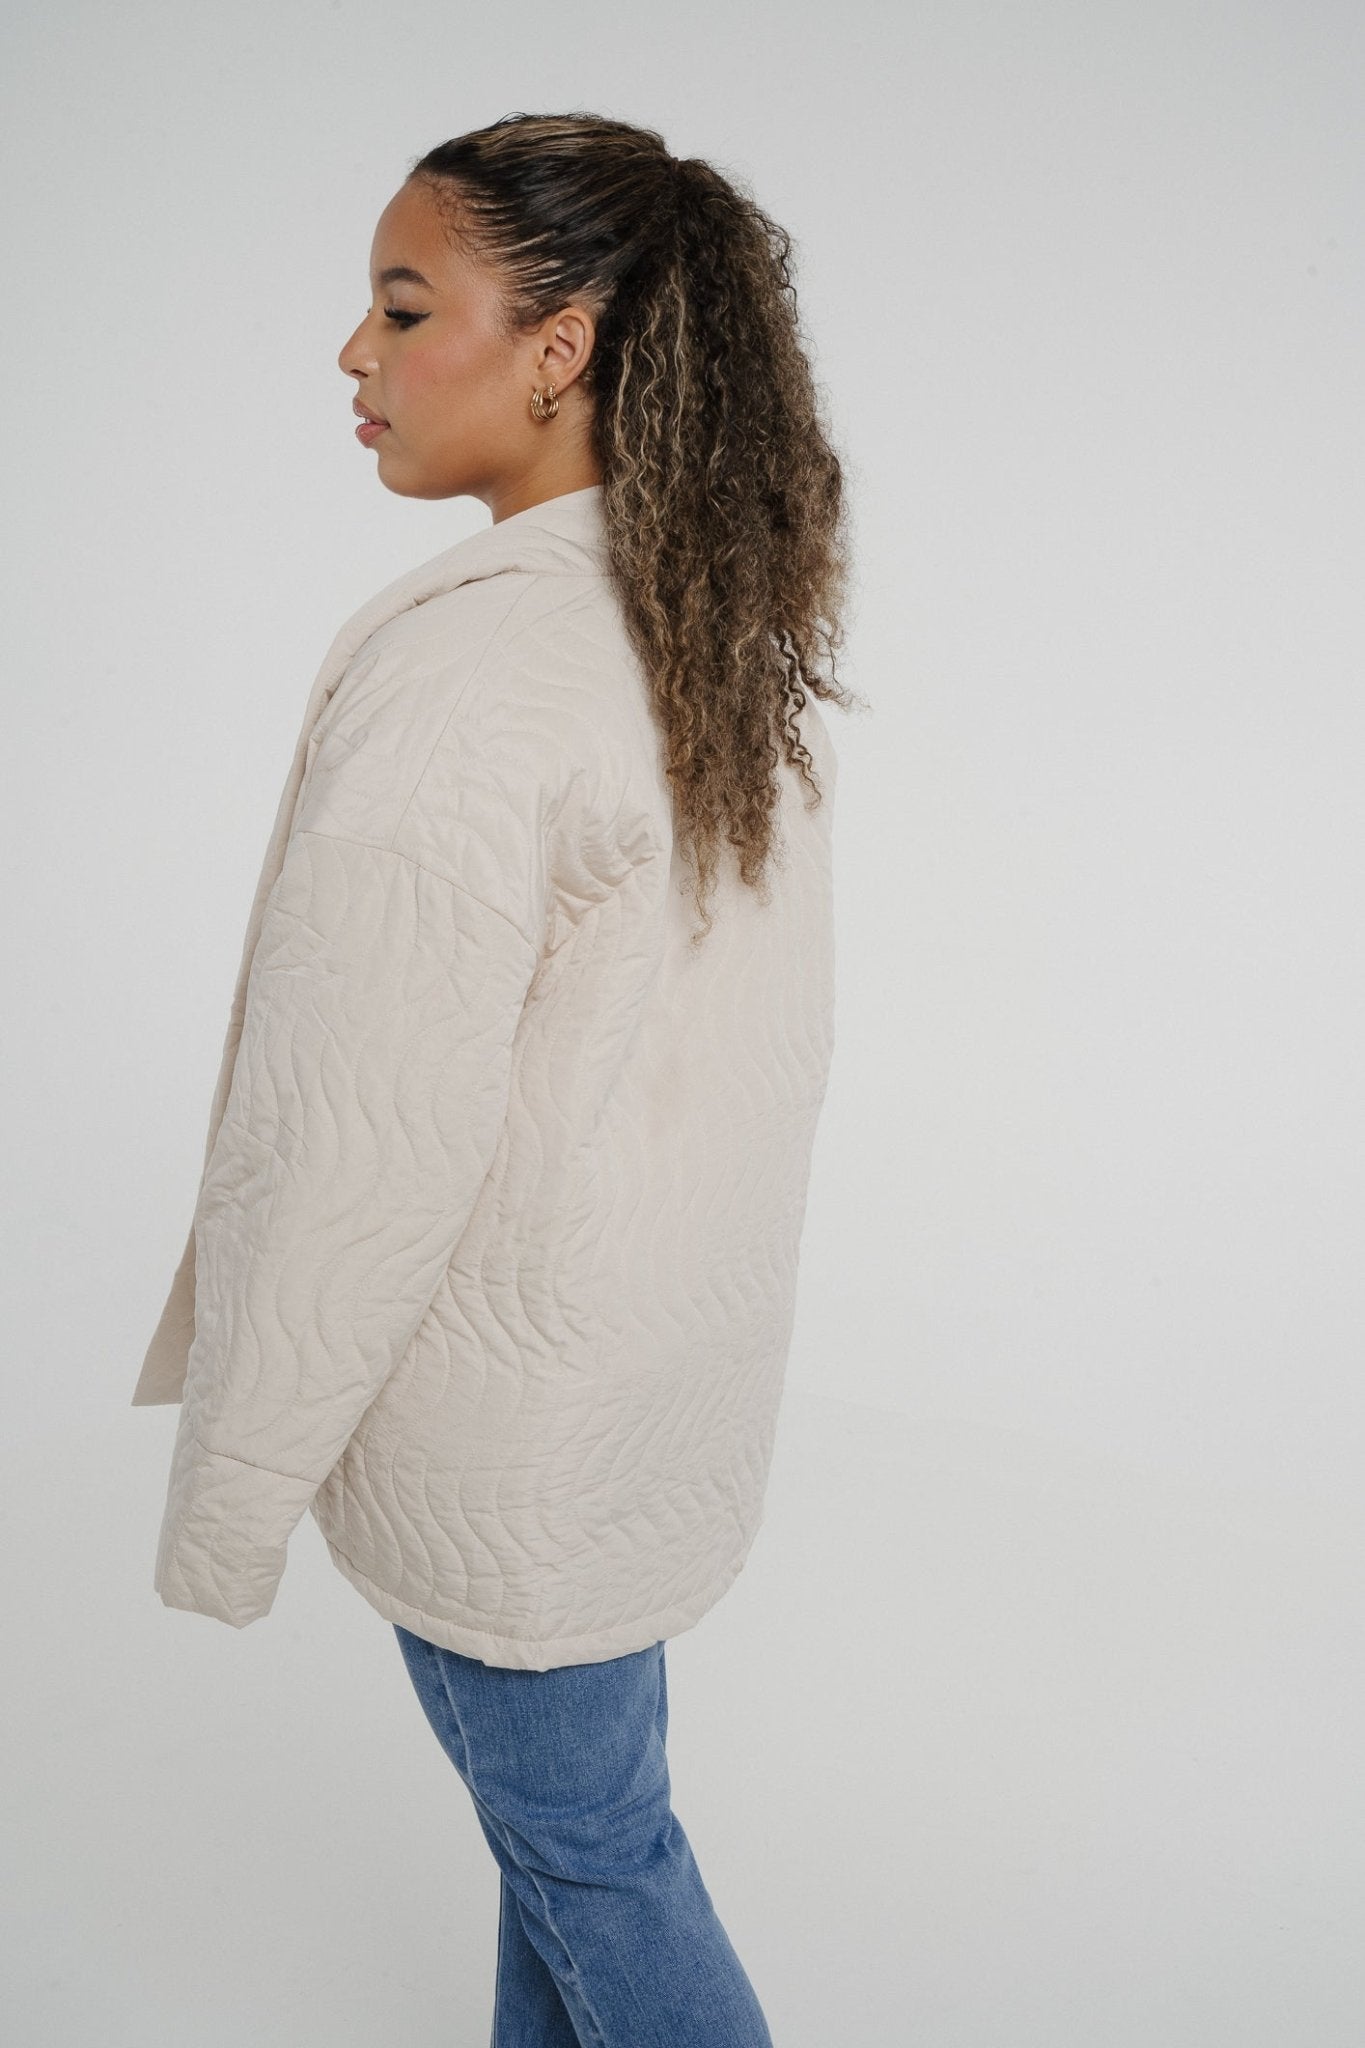 Ivy Quilted Jacket In Cream - The Walk in Wardrobe